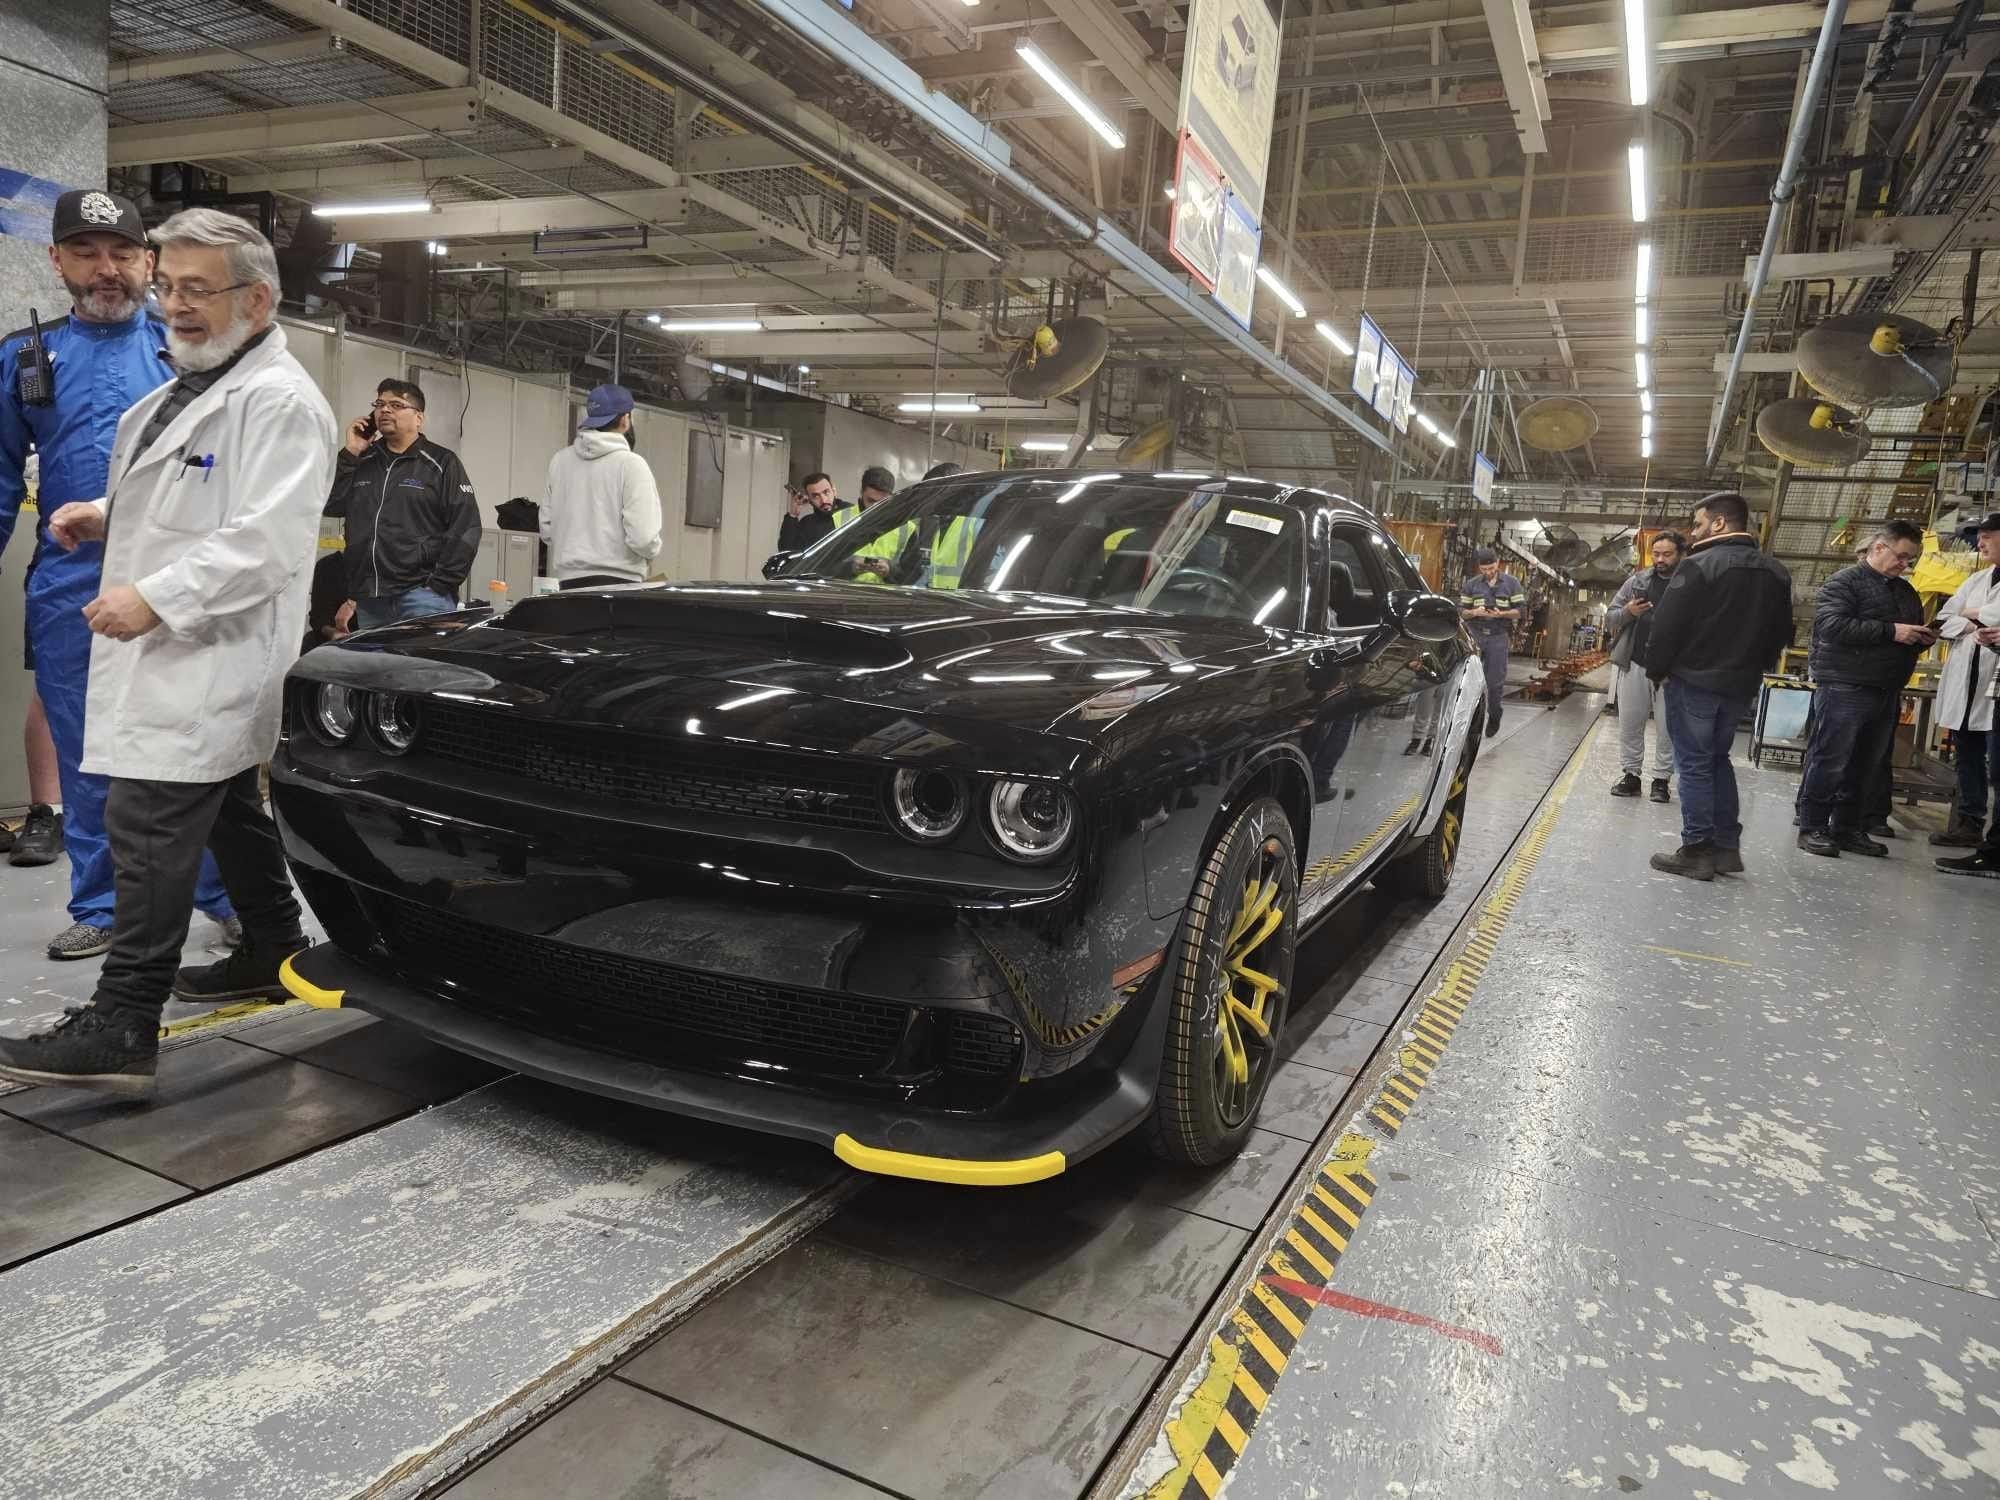 Dodge Charger and Challenger Production Has Ended